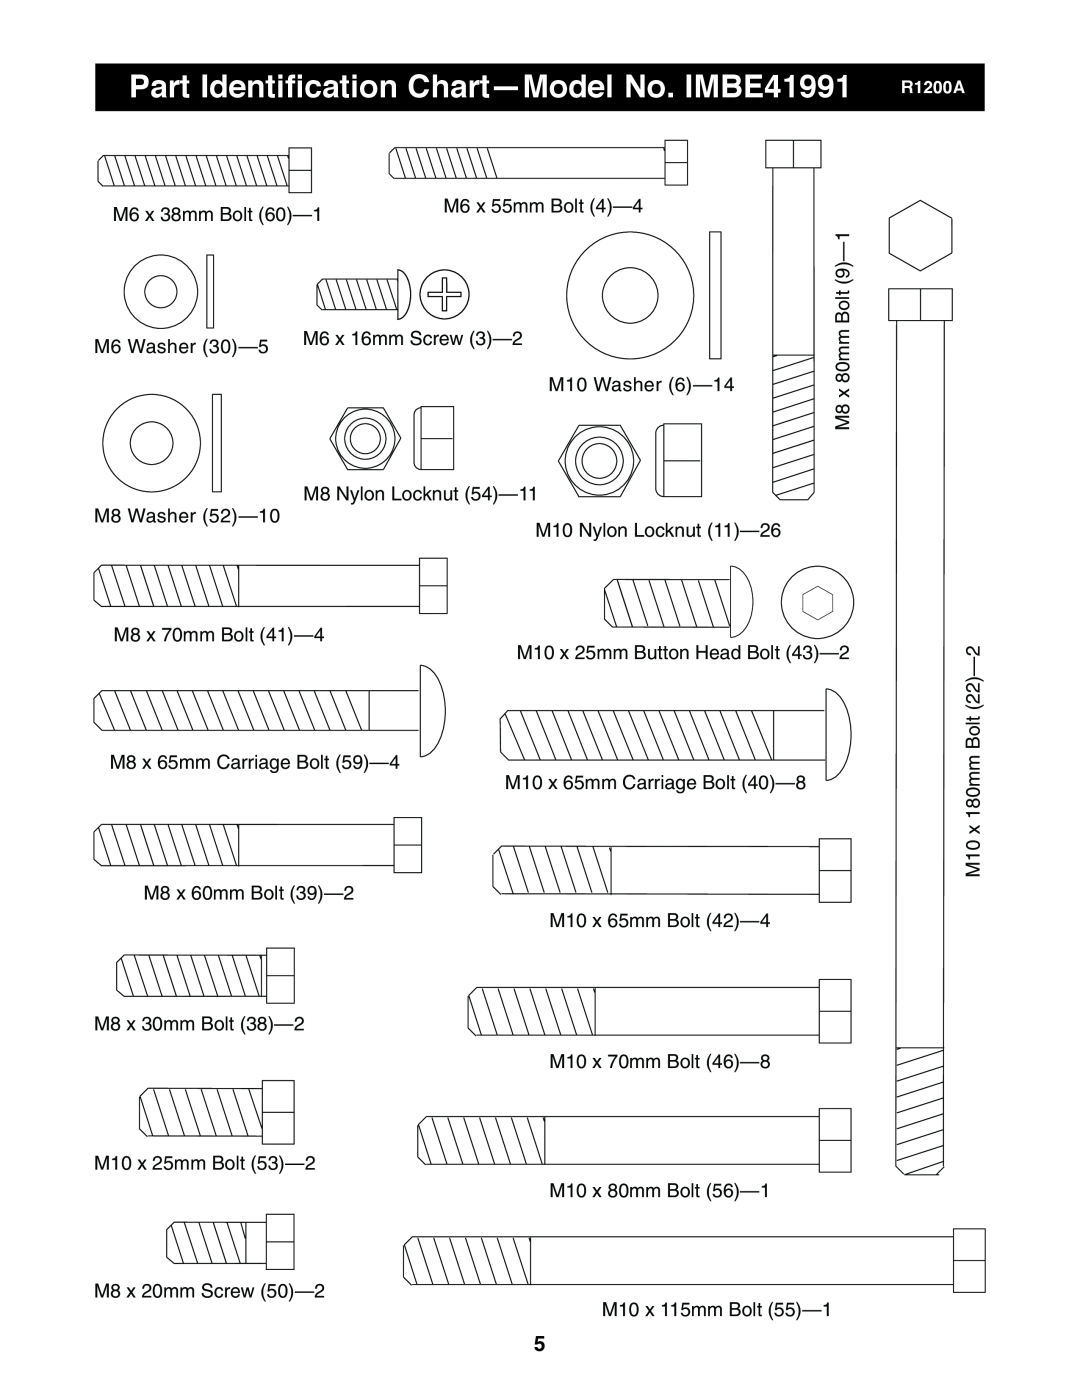 Image 3.8 user manual Part Identification Chart-Model No. IMBE41991 R1200A 